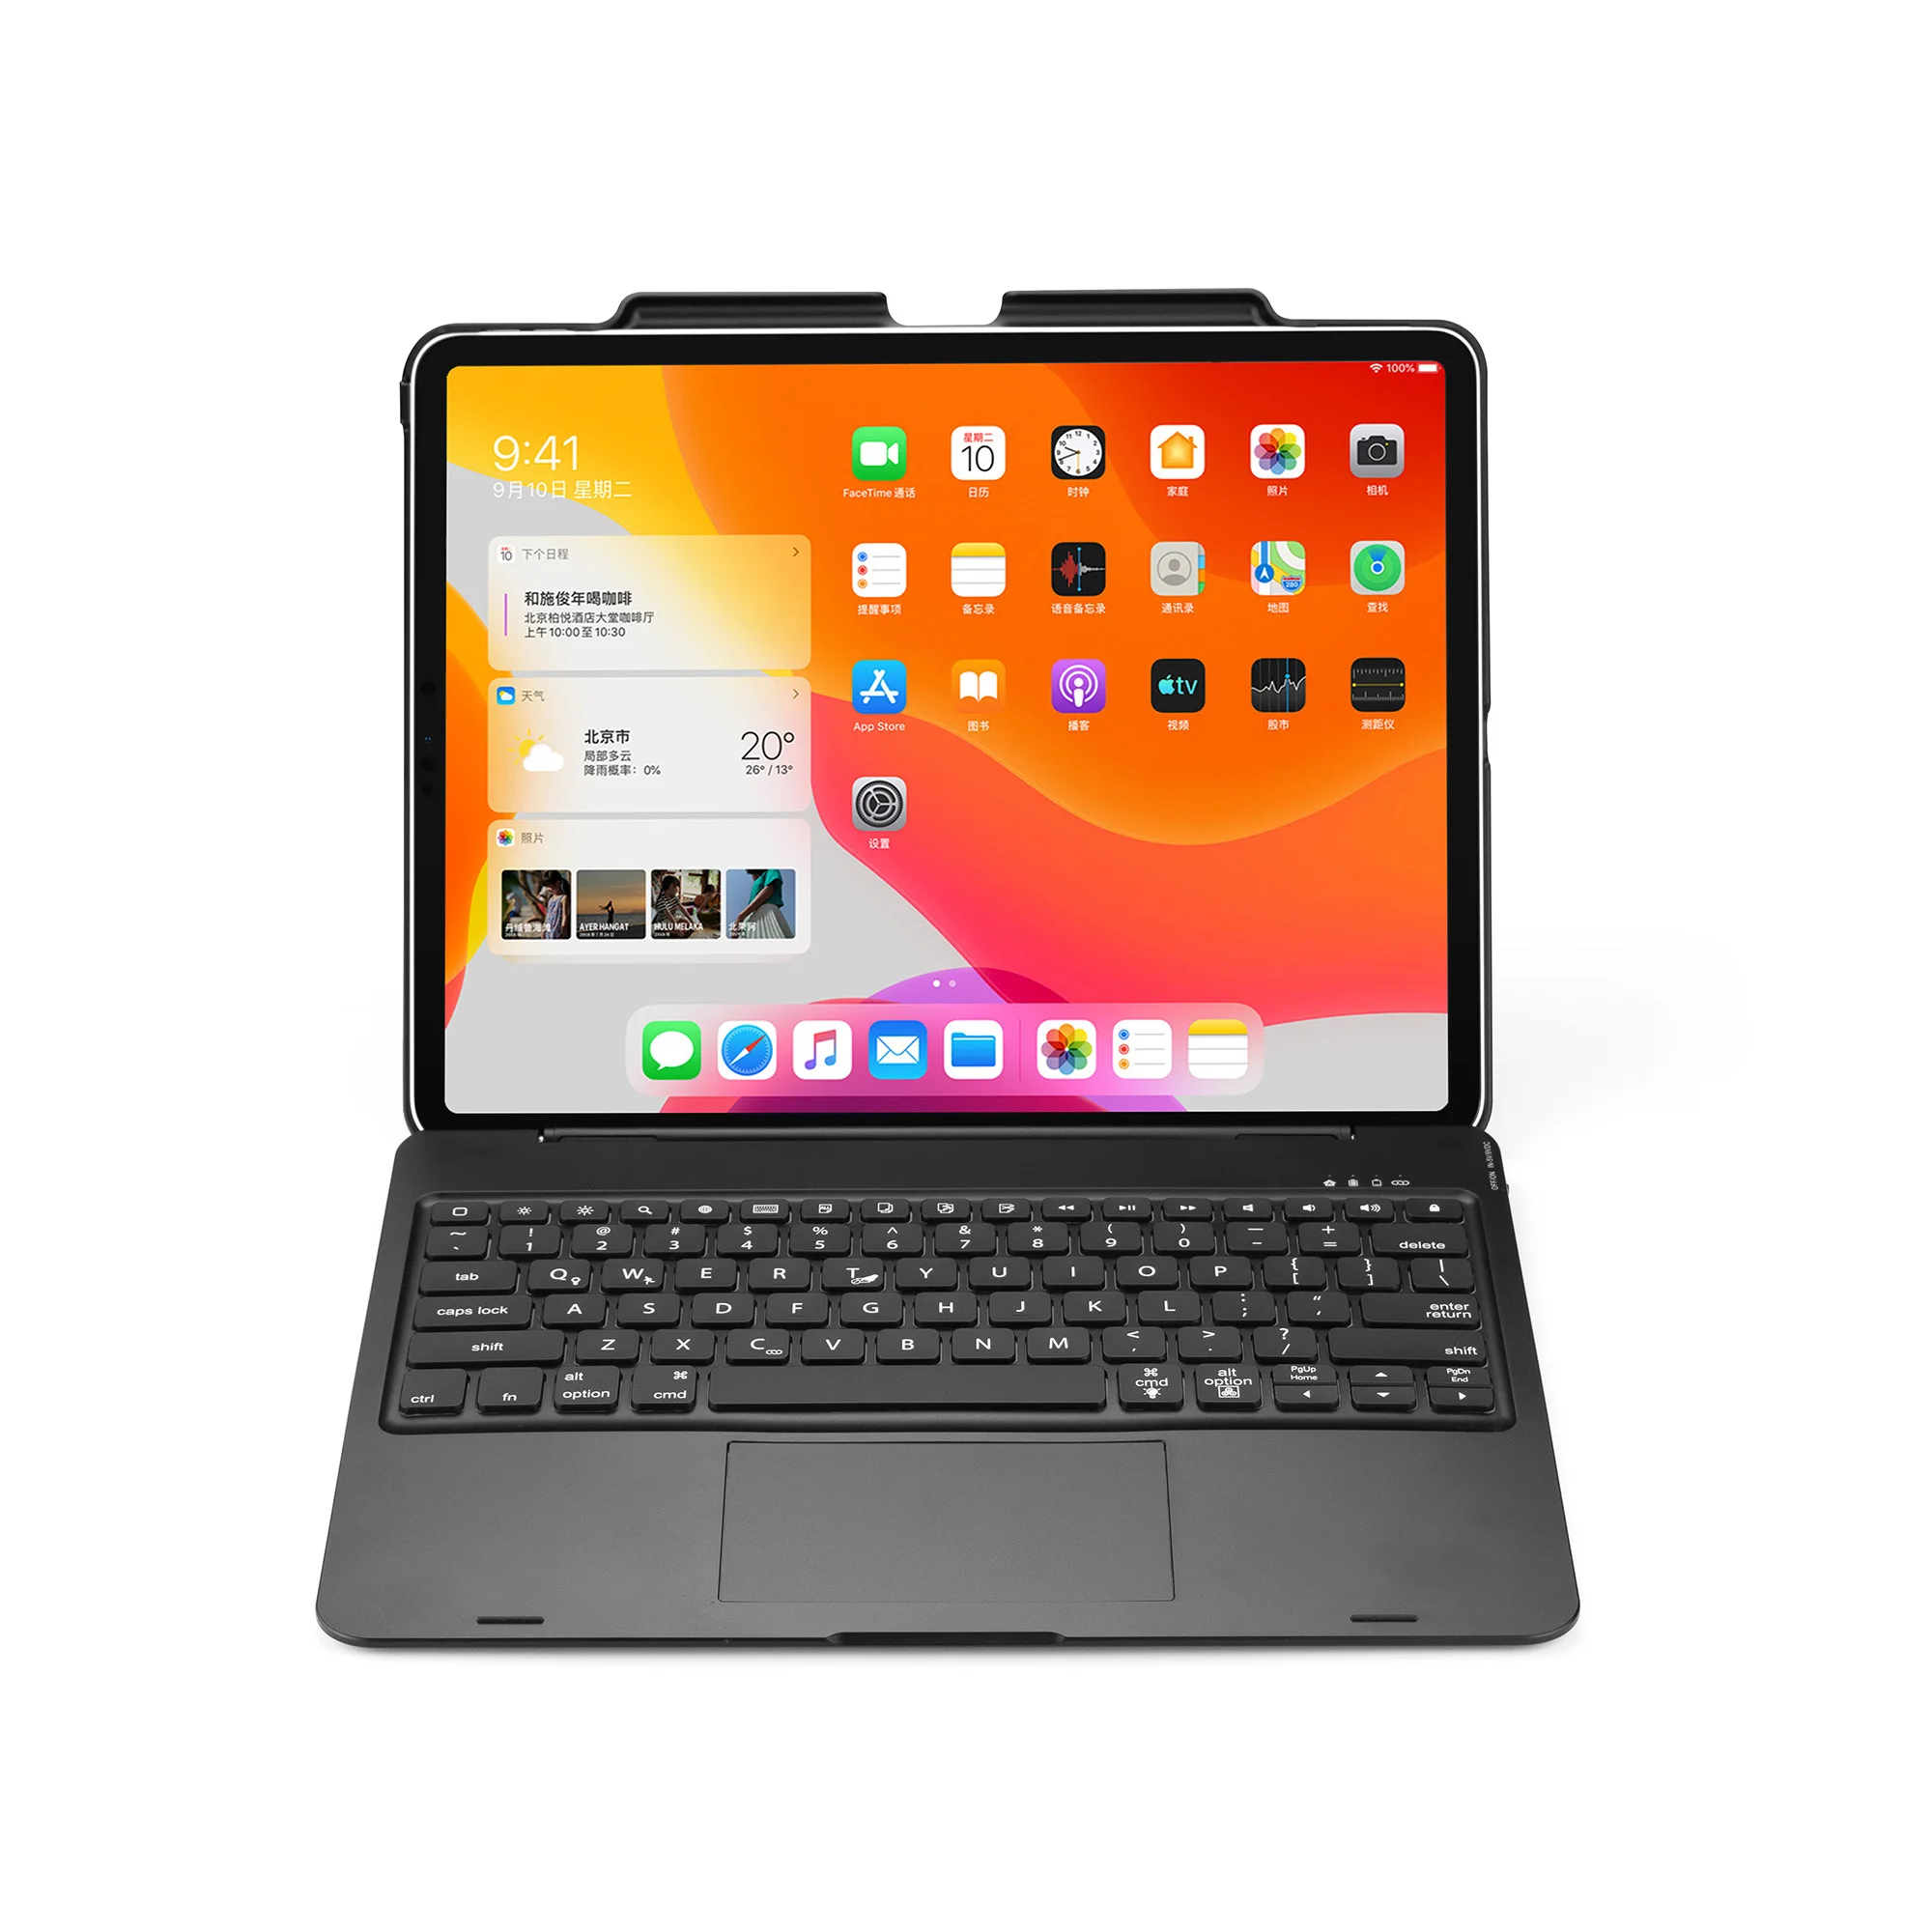 Touchpad Keyboard Compatible with iPad Pro 12.9 360°Rotating Back Cover with Backlight Wireless Keyboard Keyboard Case for iPad Pro 12.9 inch 2018-3rd Gen / 2020-4th Gen Pencil Holder Included 